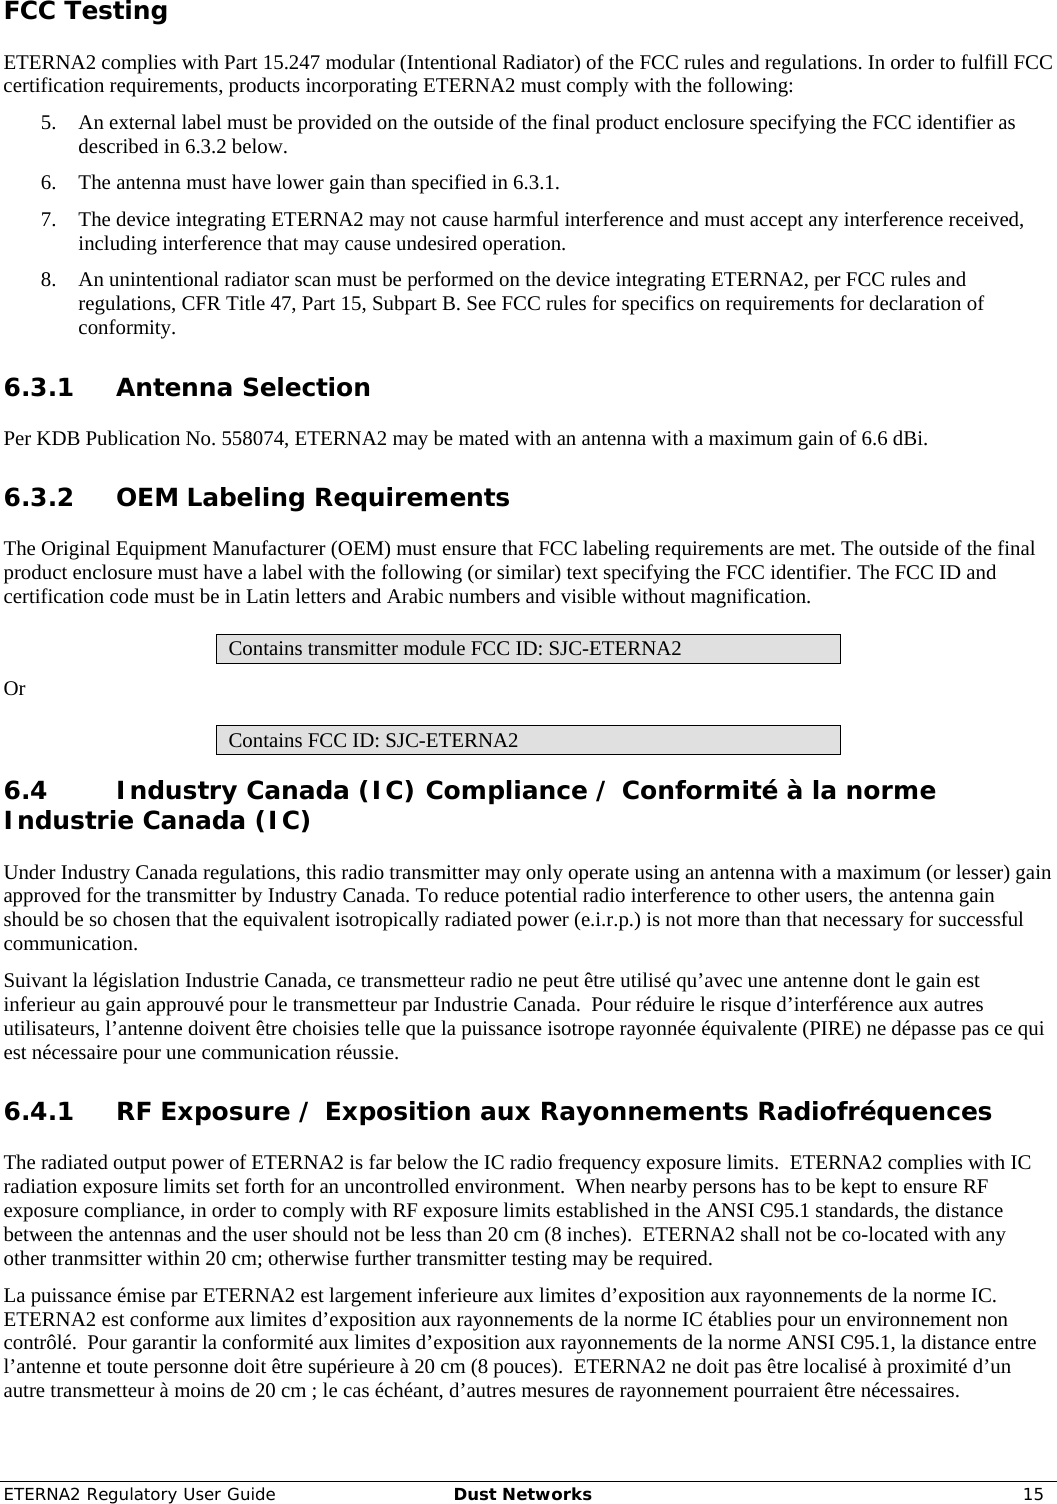 ETERNA2 Regulatory User Guide  Dust Networks  15  FCC Testing ETERNA2 complies with Part 15.247 modular (Intentional Radiator) of the FCC rules and regulations. In order to fulfill FCC certification requirements, products incorporating ETERNA2 must comply with the following: 5. An external label must be provided on the outside of the final product enclosure specifying the FCC identifier as described in 6.3.2 below. 6. The antenna must have lower gain than specified in 6.3.1. 7. The device integrating ETERNA2 may not cause harmful interference and must accept any interference received, including interference that may cause undesired operation. 8. An unintentional radiator scan must be performed on the device integrating ETERNA2, per FCC rules and regulations, CFR Title 47, Part 15, Subpart B. See FCC rules for specifics on requirements for declaration of conformity. 6.3.1 Antenna Selection Per KDB Publication No. 558074, ETERNA2 may be mated with an antenna with a maximum gain of 6.6 dBi. 6.3.2 OEM Labeling Requirements The Original Equipment Manufacturer (OEM) must ensure that FCC labeling requirements are met. The outside of the final product enclosure must have a label with the following (or similar) text specifying the FCC identifier. The FCC ID and certification code must be in Latin letters and Arabic numbers and visible without magnification. Contains transmitter module FCC ID: SJC-ETERNA2 Or Contains FCC ID: SJC-ETERNA2 6.4 Industry Canada (IC) Compliance / Conformité à la norme Industrie Canada (IC) Under Industry Canada regulations, this radio transmitter may only operate using an antenna with a maximum (or lesser) gain approved for the transmitter by Industry Canada. To reduce potential radio interference to other users, the antenna gain should be so chosen that the equivalent isotropically radiated power (e.i.r.p.) is not more than that necessary for successful communication.   Suivant la législation Industrie Canada, ce transmetteur radio ne peut être utilisé qu’avec une antenne dont le gain est inferieur au gain approuvé pour le transmetteur par Industrie Canada.  Pour réduire le risque d’interférence aux autres utilisateurs, l’antenne doivent être choisies telle que la puissance isotrope rayonnée équivalente (PIRE) ne dépasse pas ce qui est nécessaire pour une communication réussie. 6.4.1 RF Exposure / Exposition aux Rayonnements Radiofréquences The radiated output power of ETERNA2 is far below the IC radio frequency exposure limits.  ETERNA2 complies with IC radiation exposure limits set forth for an uncontrolled environment.  When nearby persons has to be kept to ensure RF exposure compliance, in order to comply with RF exposure limits established in the ANSI C95.1 standards, the distance between the antennas and the user should not be less than 20 cm (8 inches).  ETERNA2 shall not be co-located with any other tranmsitter within 20 cm; otherwise further transmitter testing may be required. La puissance émise par ETERNA2 est largement inferieure aux limites d’exposition aux rayonnements de la norme IC. ETERNA2 est conforme aux limites d’exposition aux rayonnements de la norme IC établies pour un environnement non contrôlé.  Pour garantir la conformité aux limites d’exposition aux rayonnements de la norme ANSI C95.1, la distance entre l’antenne et toute personne doit être supérieure à 20 cm (8 pouces).  ETERNA2 ne doit pas être localisé à proximité d’un autre transmetteur à moins de 20 cm ; le cas échéant, d’autres mesures de rayonnement pourraient être nécessaires. 